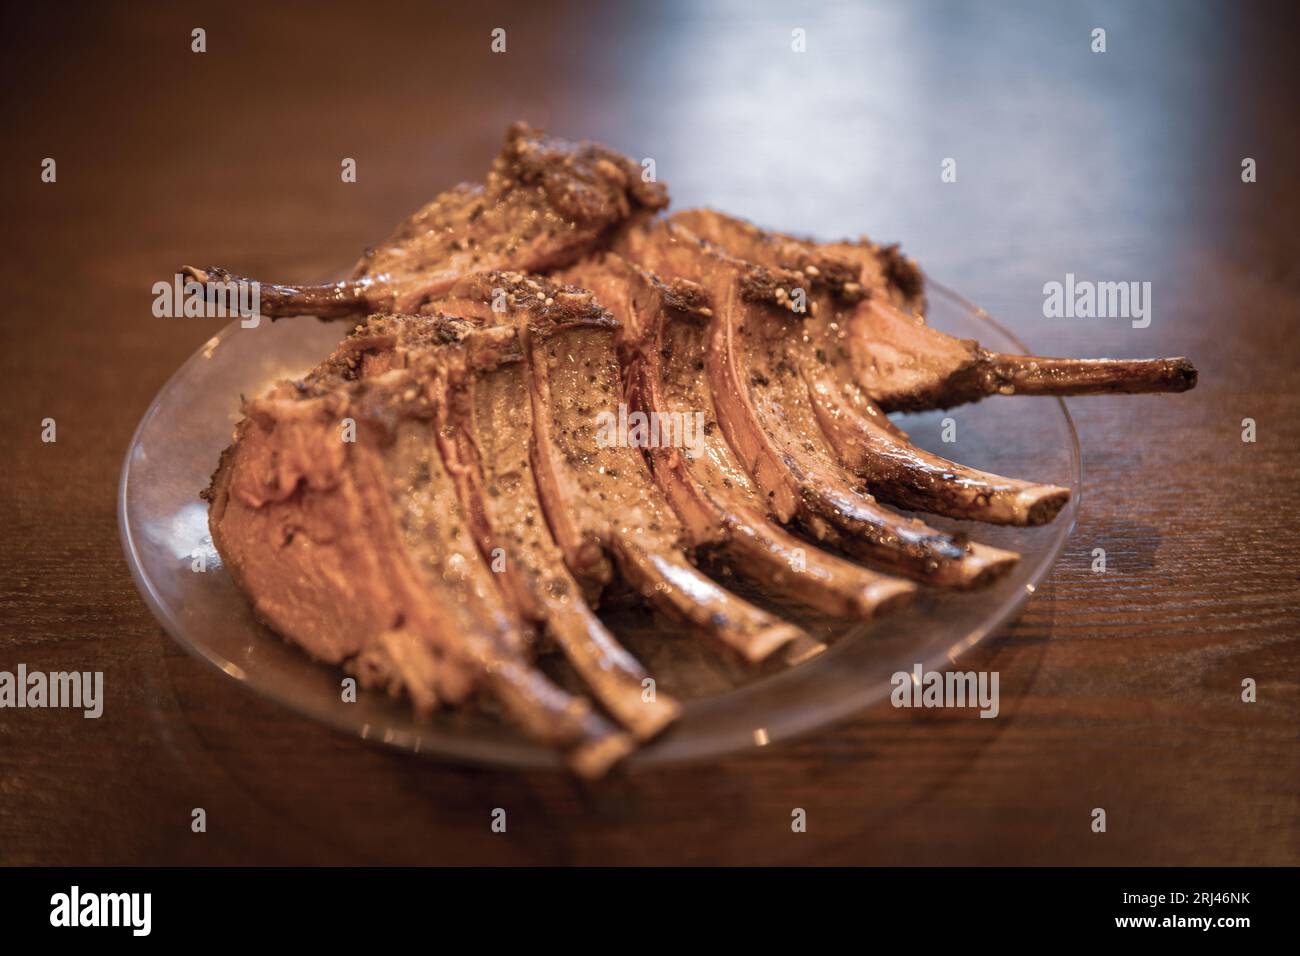 Frenched rack of lamb on a served on a plate Stock Photo